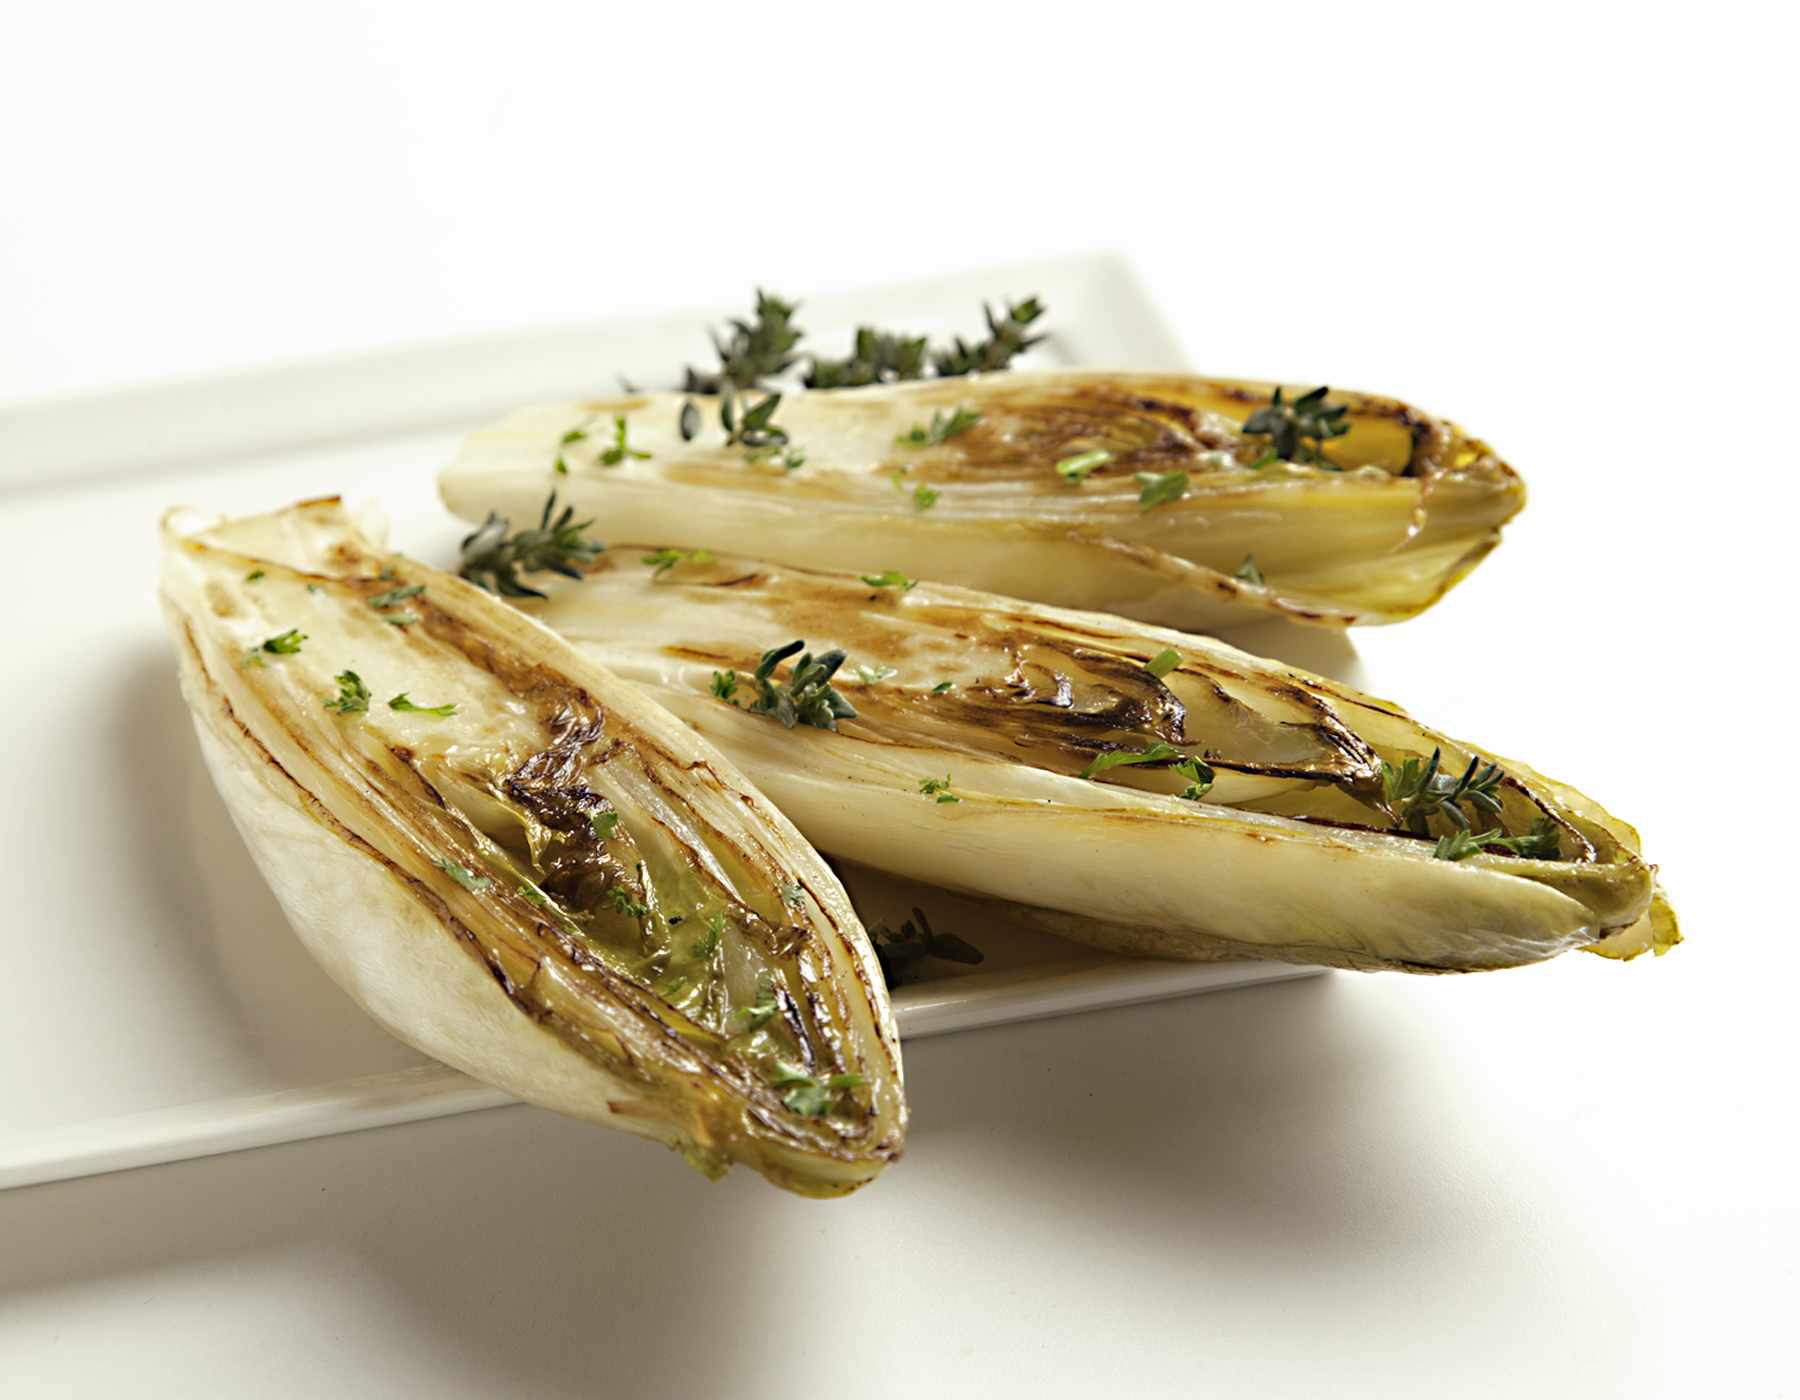 Grilled Endive with Balsamic Rosemary Marinade